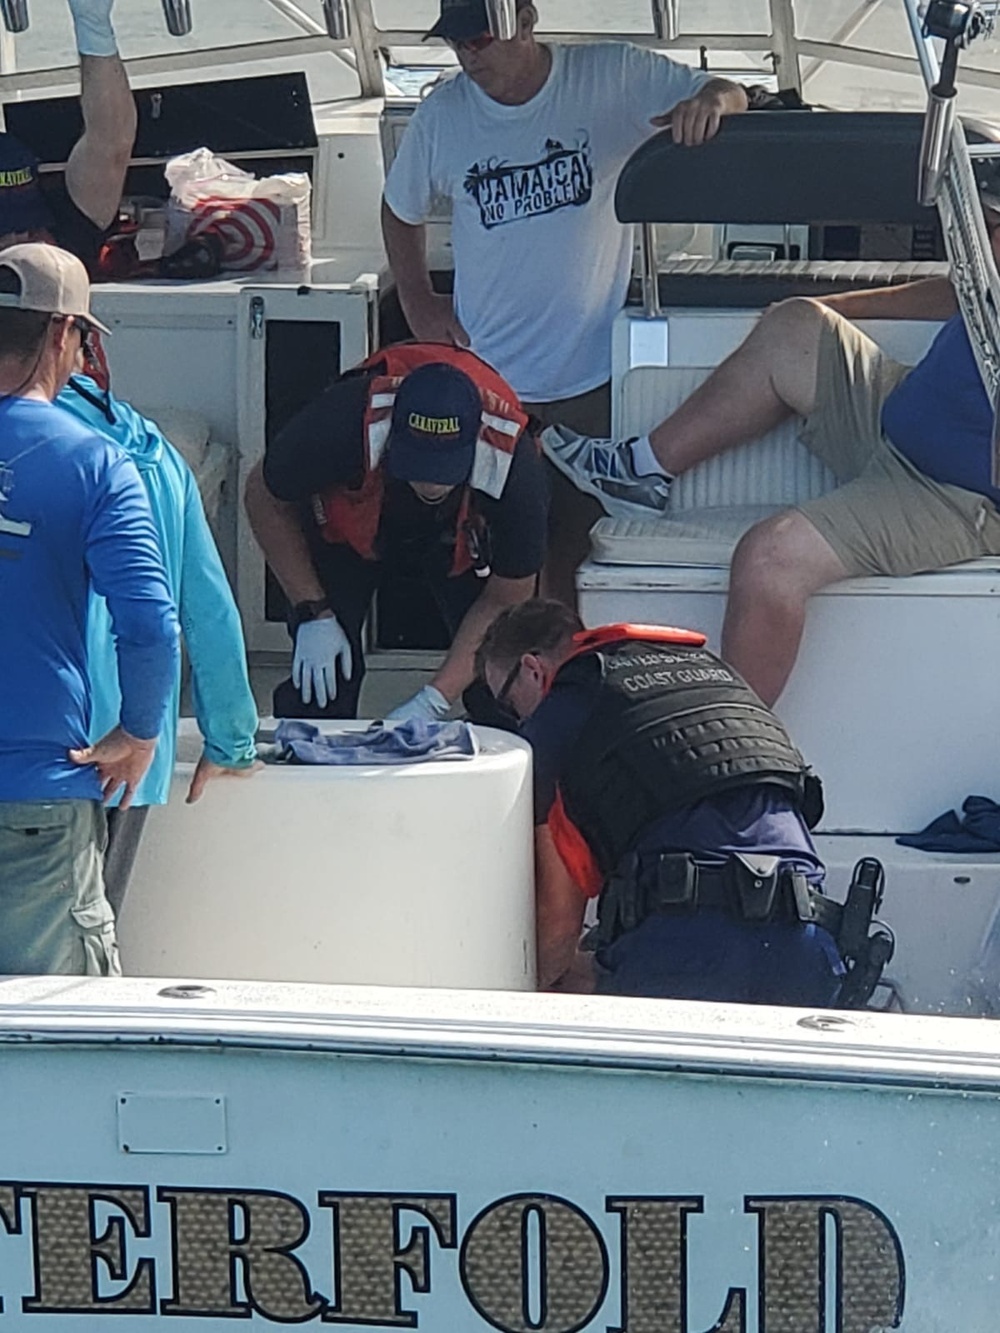 Coast Guard medevacs man from fishing vessel 20 miles east of Cape Canaveral